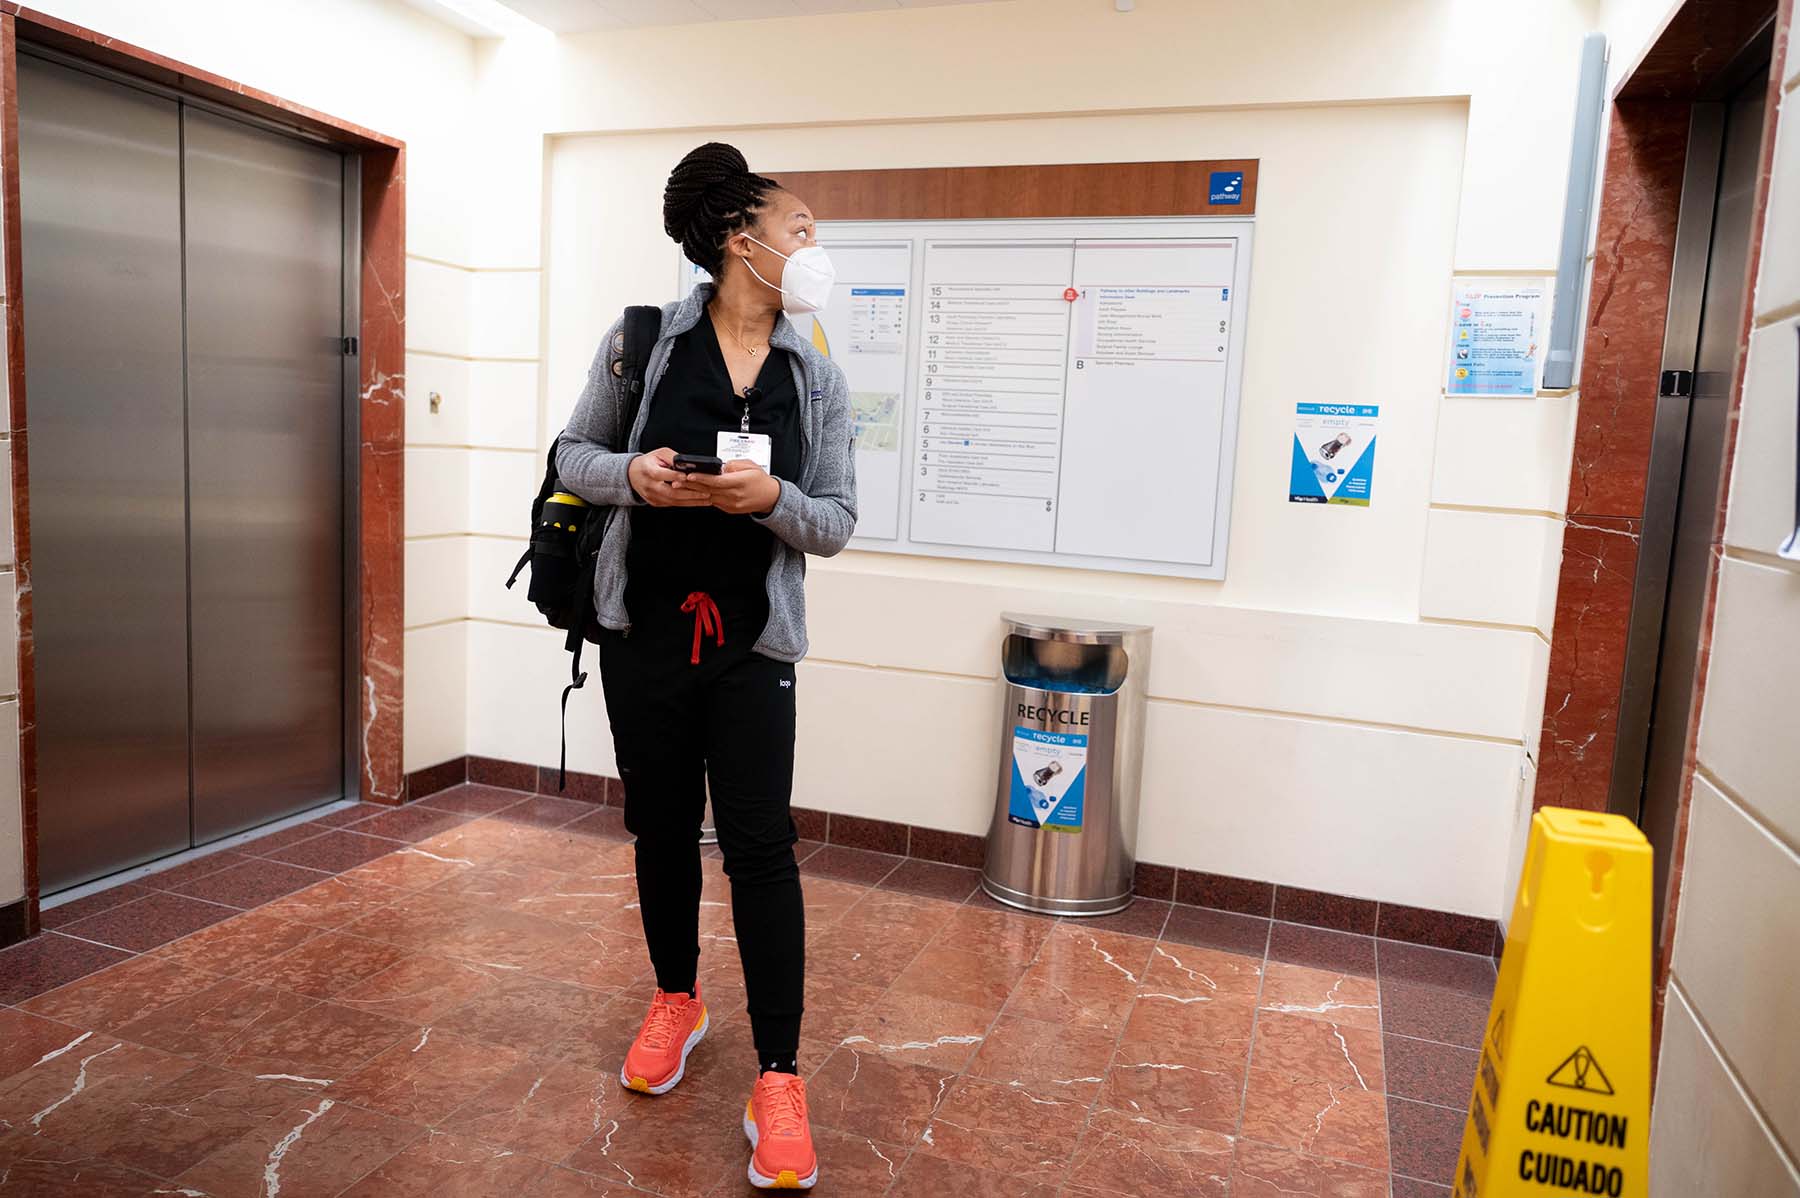 Kelechi Okpara holds her phone in her hand while she waits for an elevator at the UCSF Parnassus Heights campus.